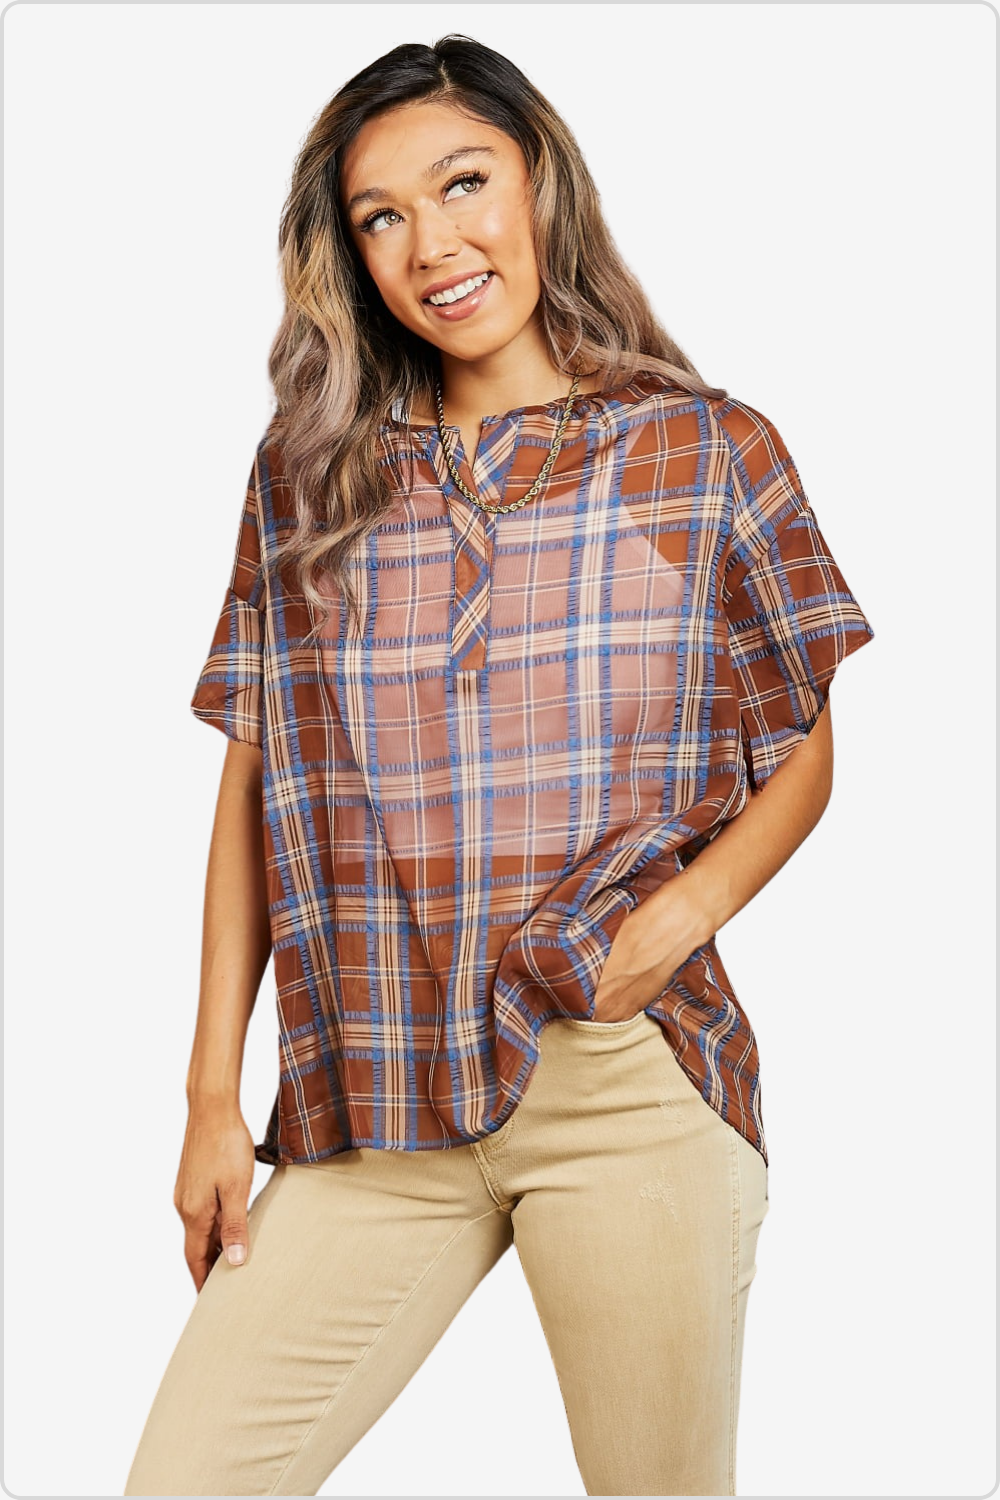 Chic plaid V-neck top with a flowy silhouette, showcasing casual elegance.